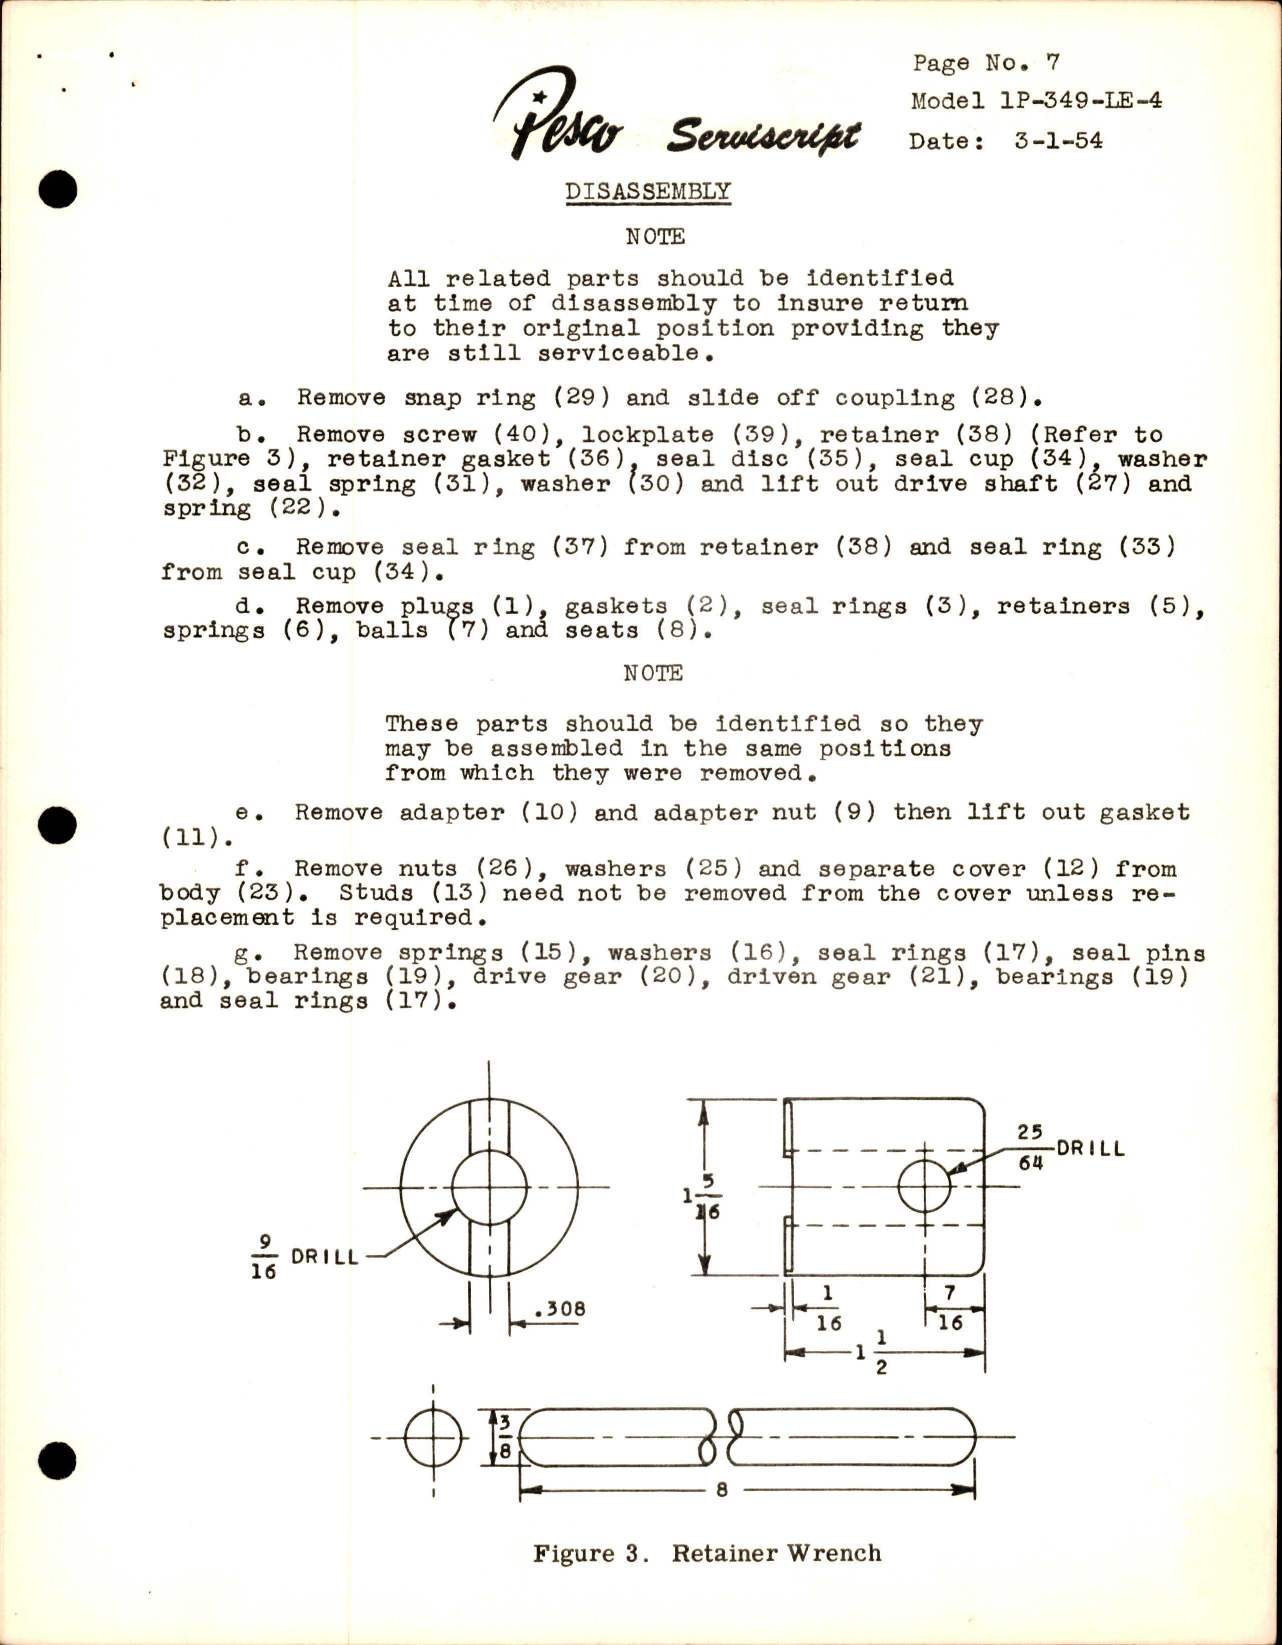 Sample page 7 from AirCorps Library document: Maintenance, Overhaul Instructions, and Test Procedures with Parts List for Hydraulic Gear Pump - Model 1P-349-LE-4 